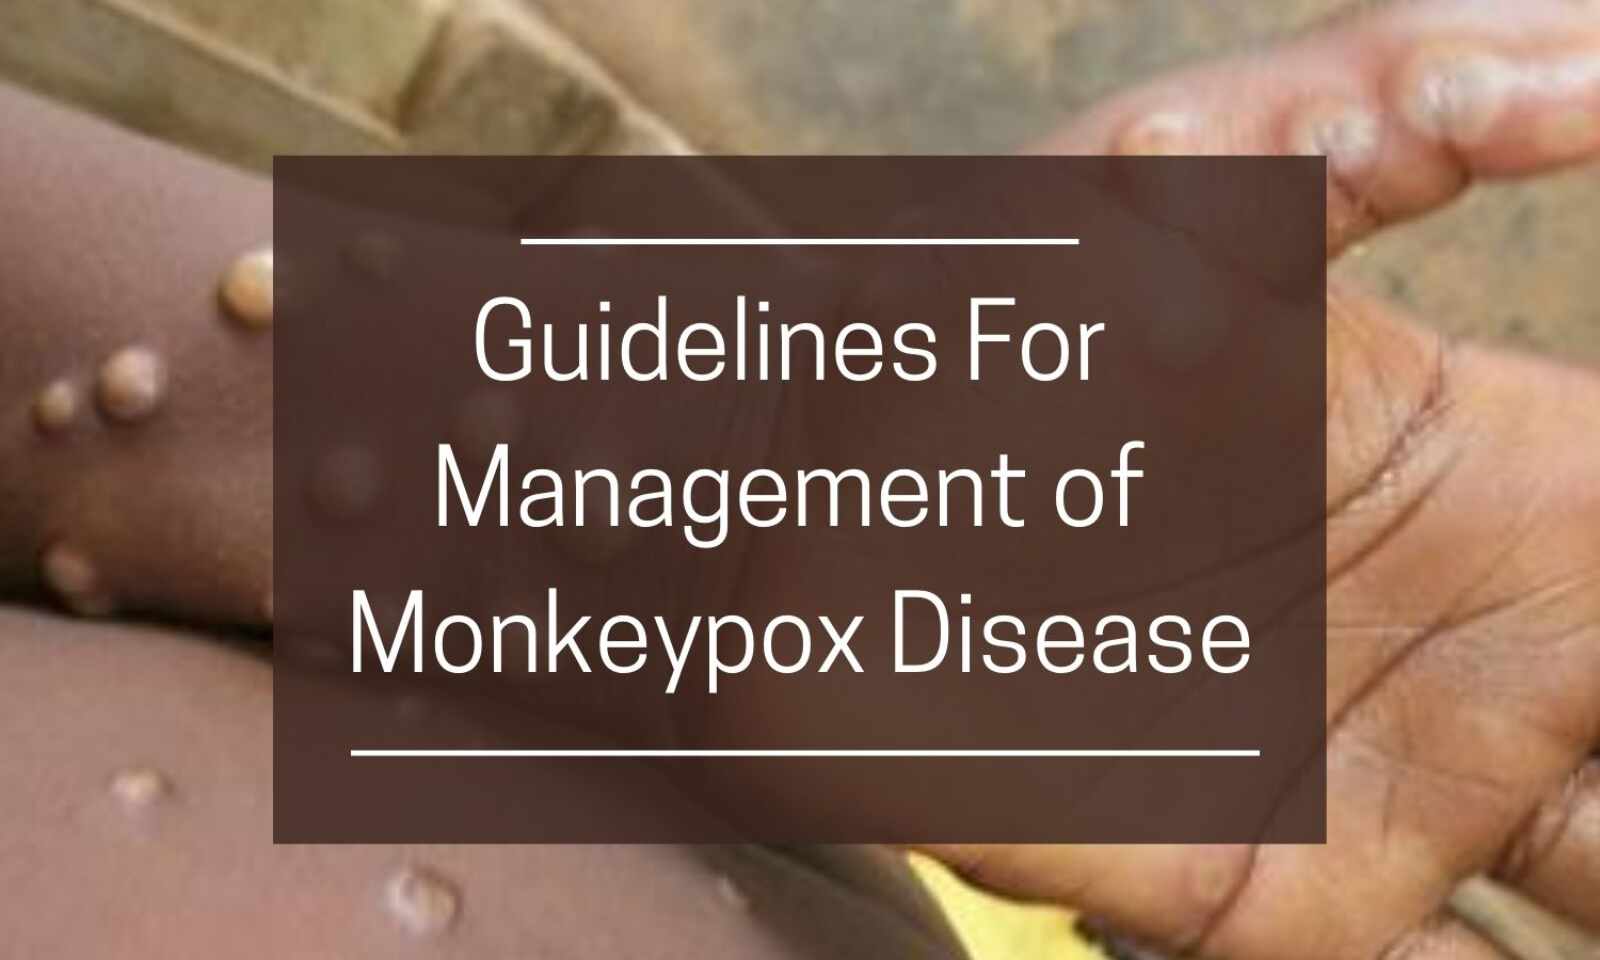 GUIDELINES OF MONKEYPOX FOR MANAGEMENT DISEASE 